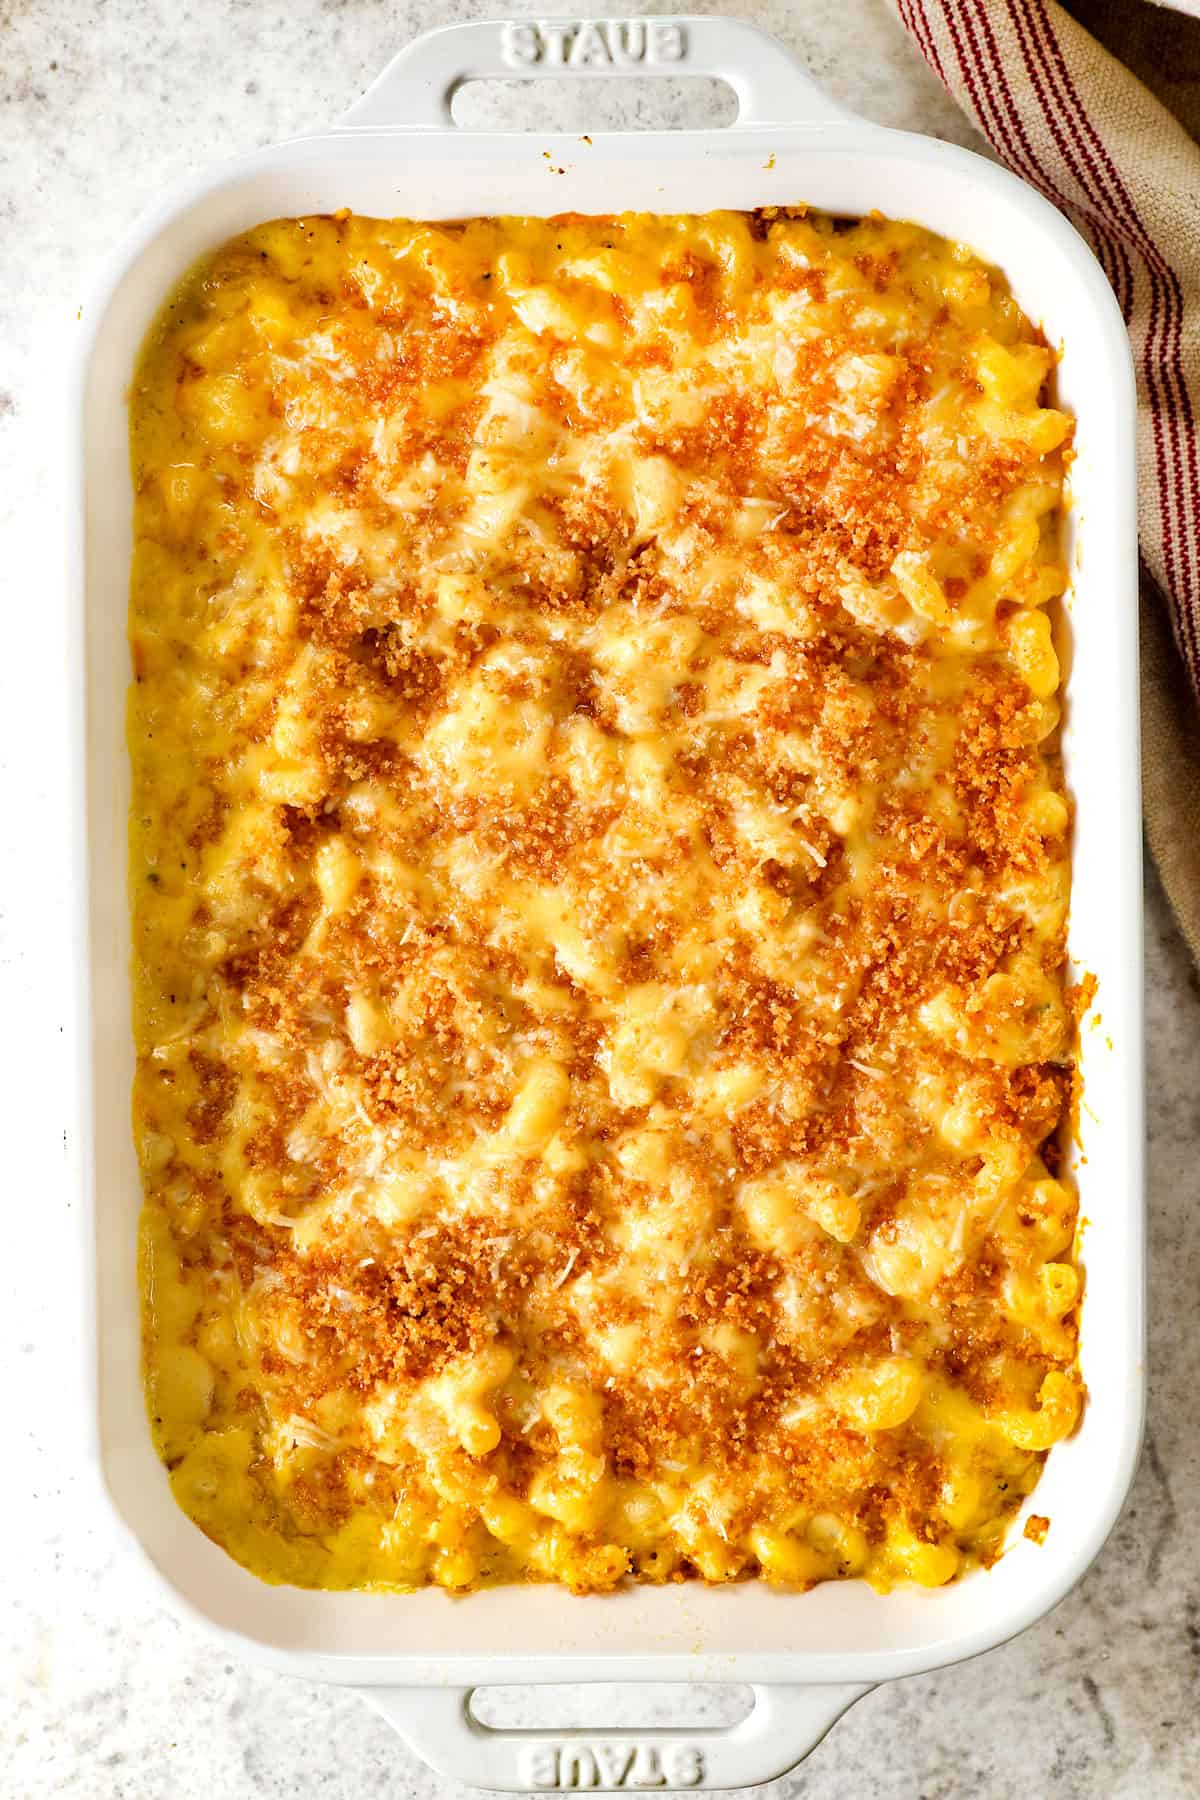 showing how to make Baked Macaroni and Cheese recipe with bread crumbs by baking until the cheese is melted